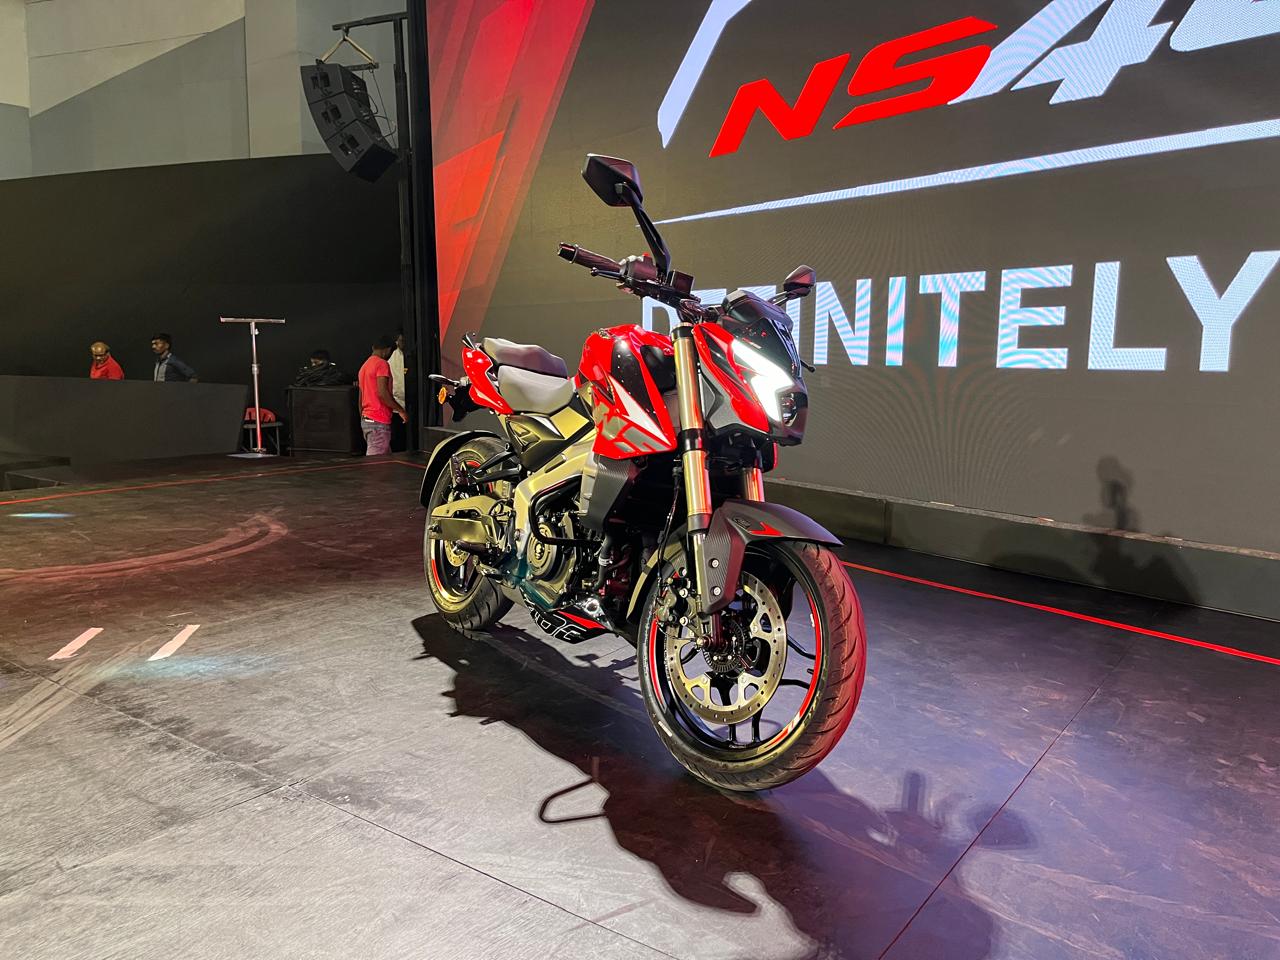 The Pulsar NS400Z is the Bajaj Auto's most advanced motorcycle yet with ride-by-wire, multiple riding modes, traction control and Bluetooth connectivity